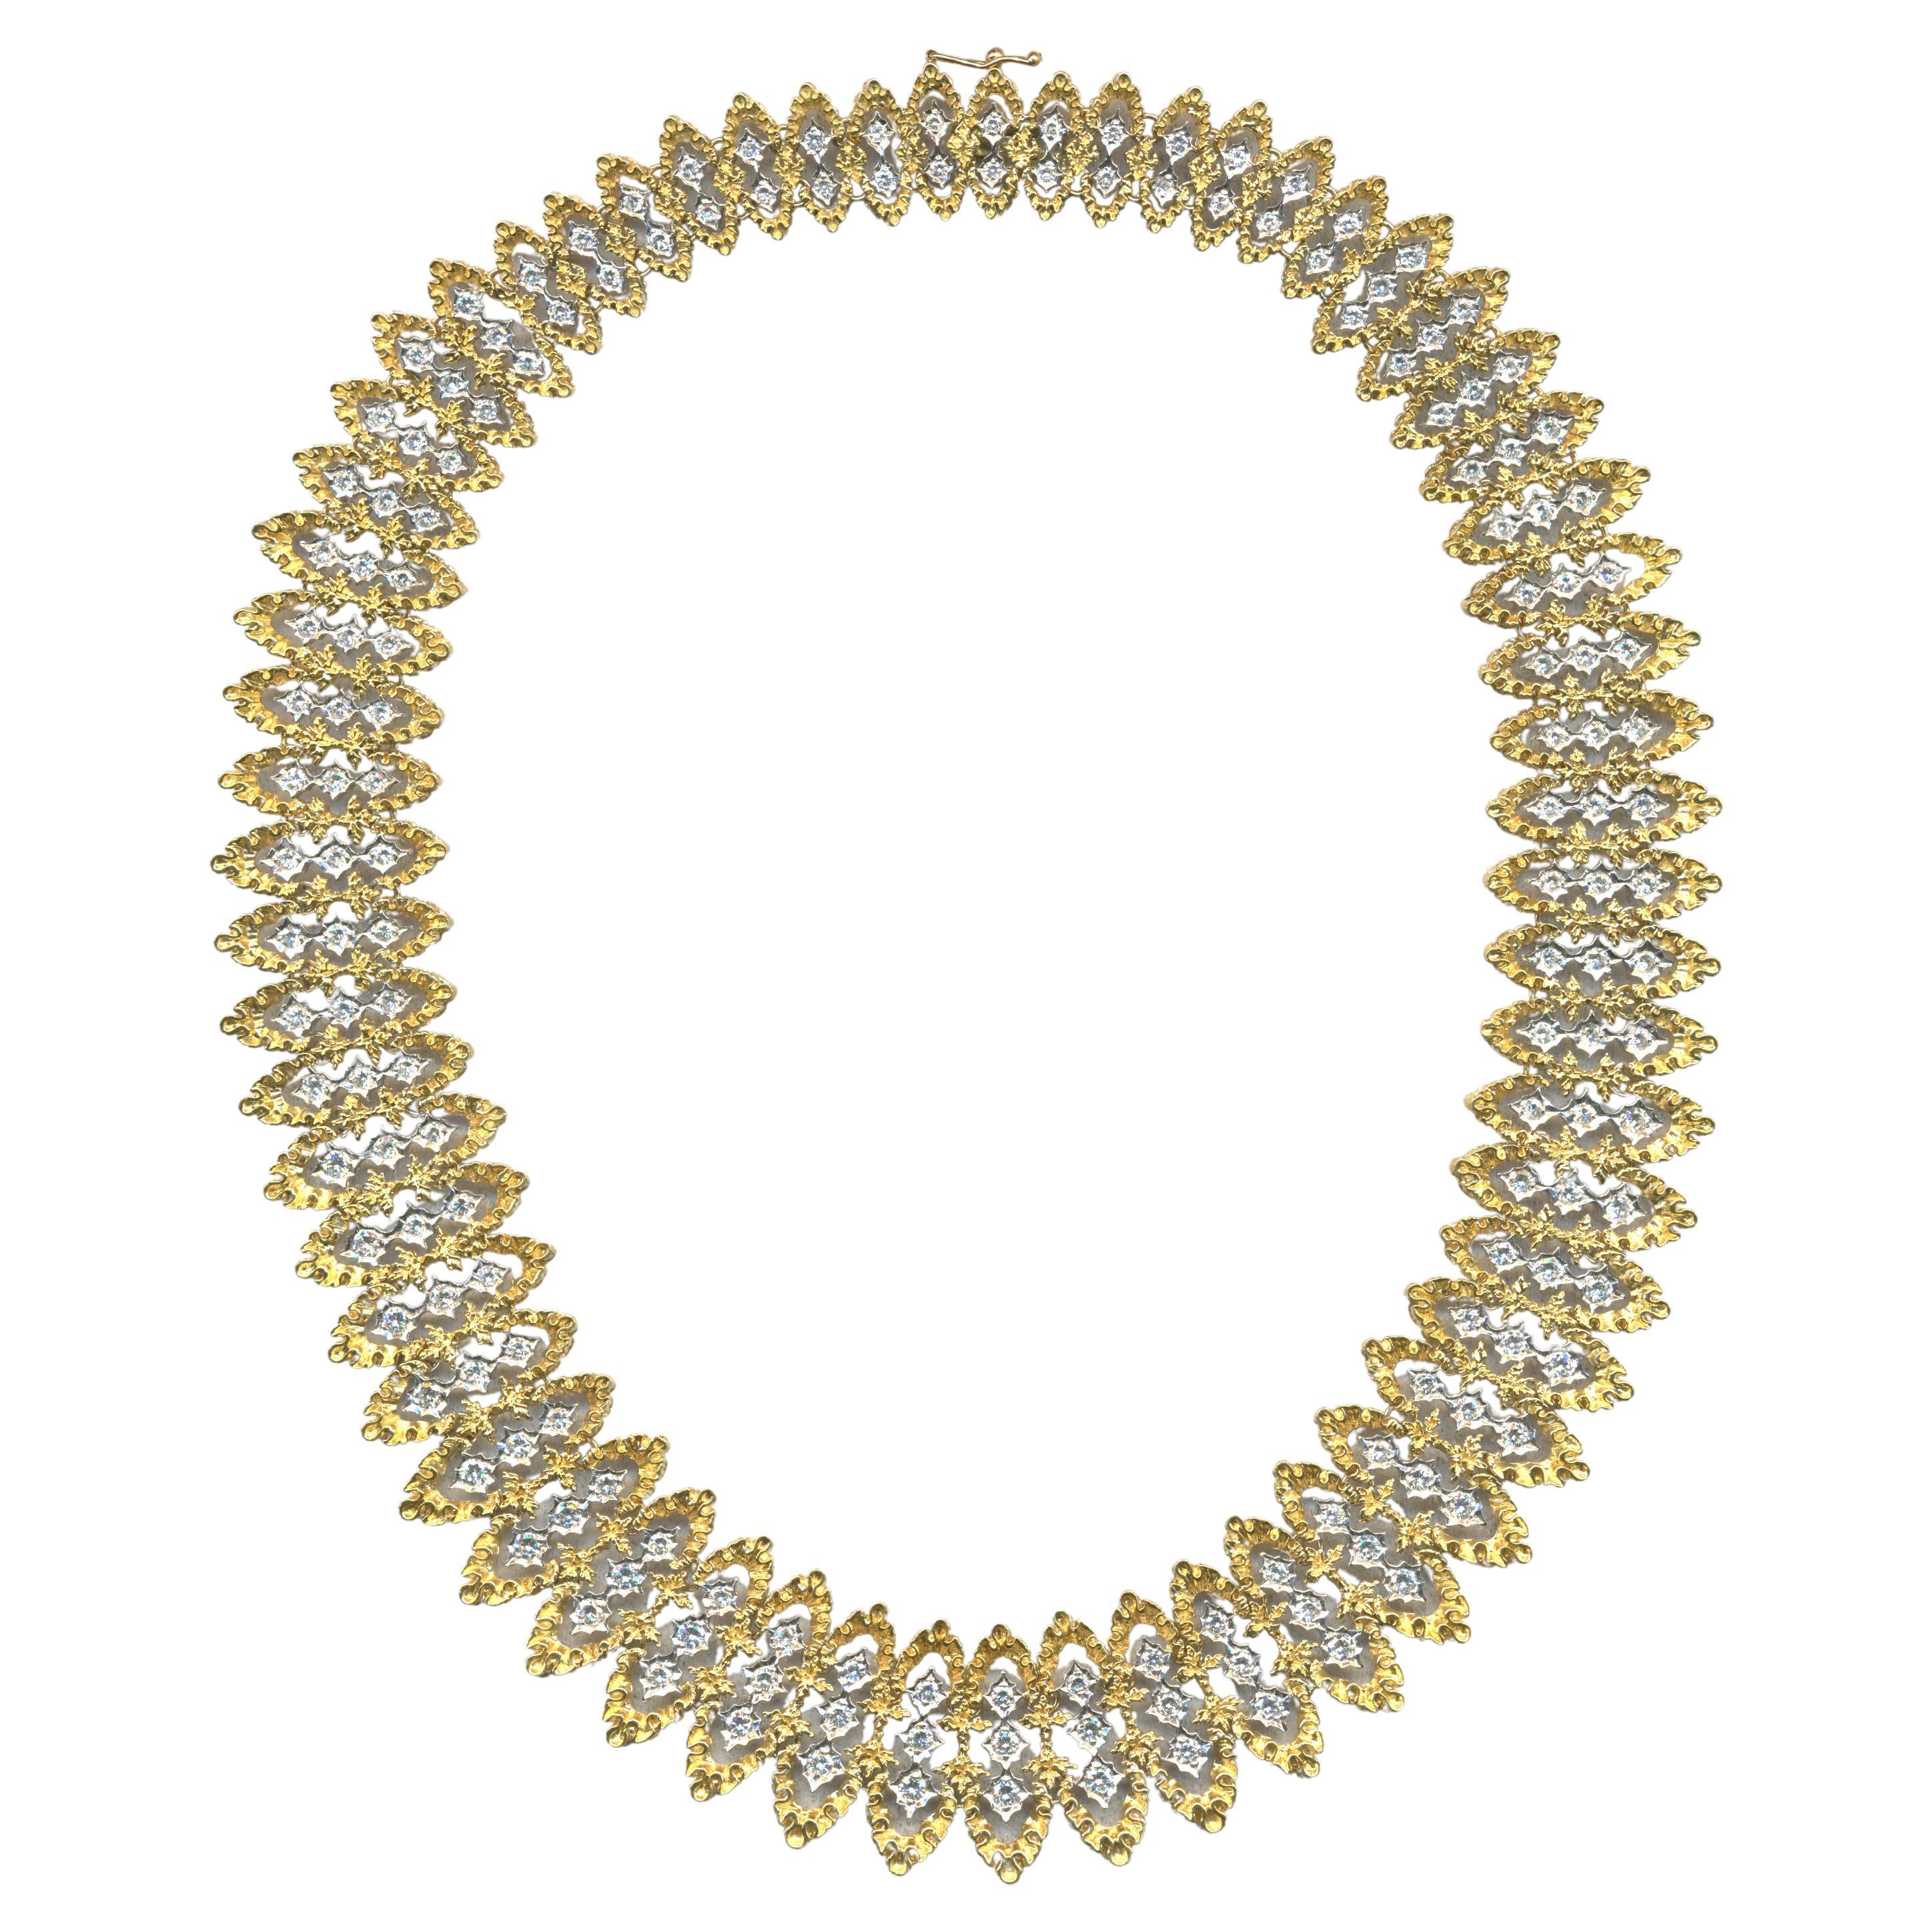 Impressive Heavy Diamond  Necklace in 18k Yellow Gold [5 Ounces+] 7.00 carats  For Sale